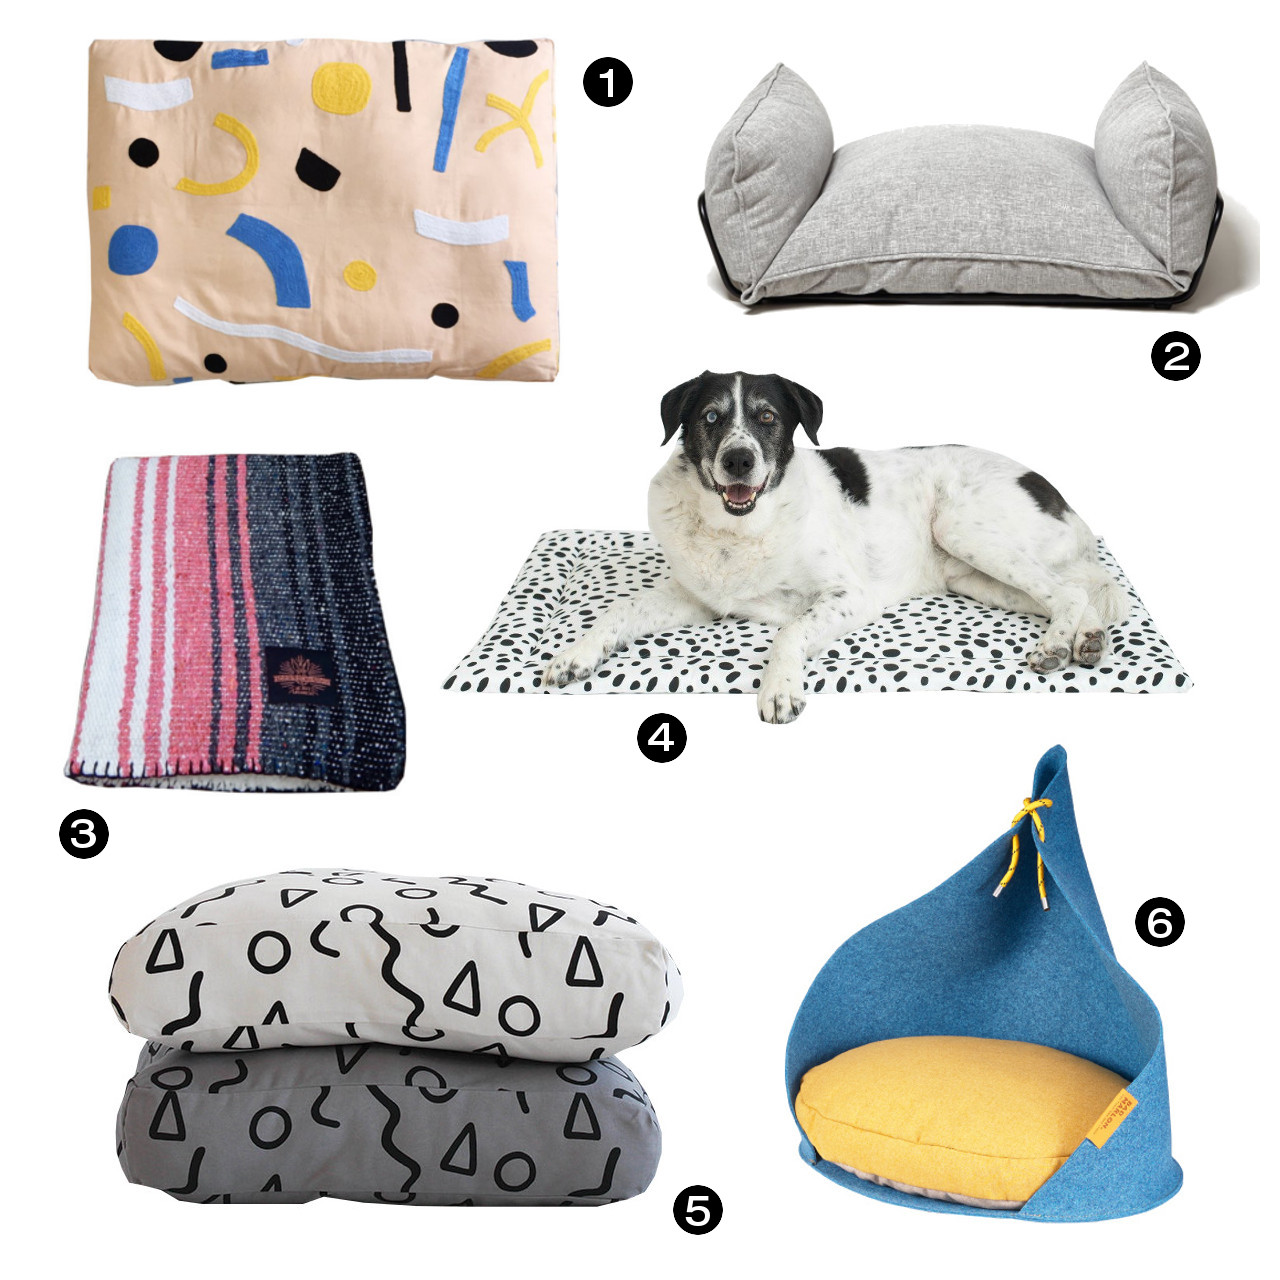 Dog Milk Holiday Gift Guide: 12 Cozy Dog Beds and Blankets